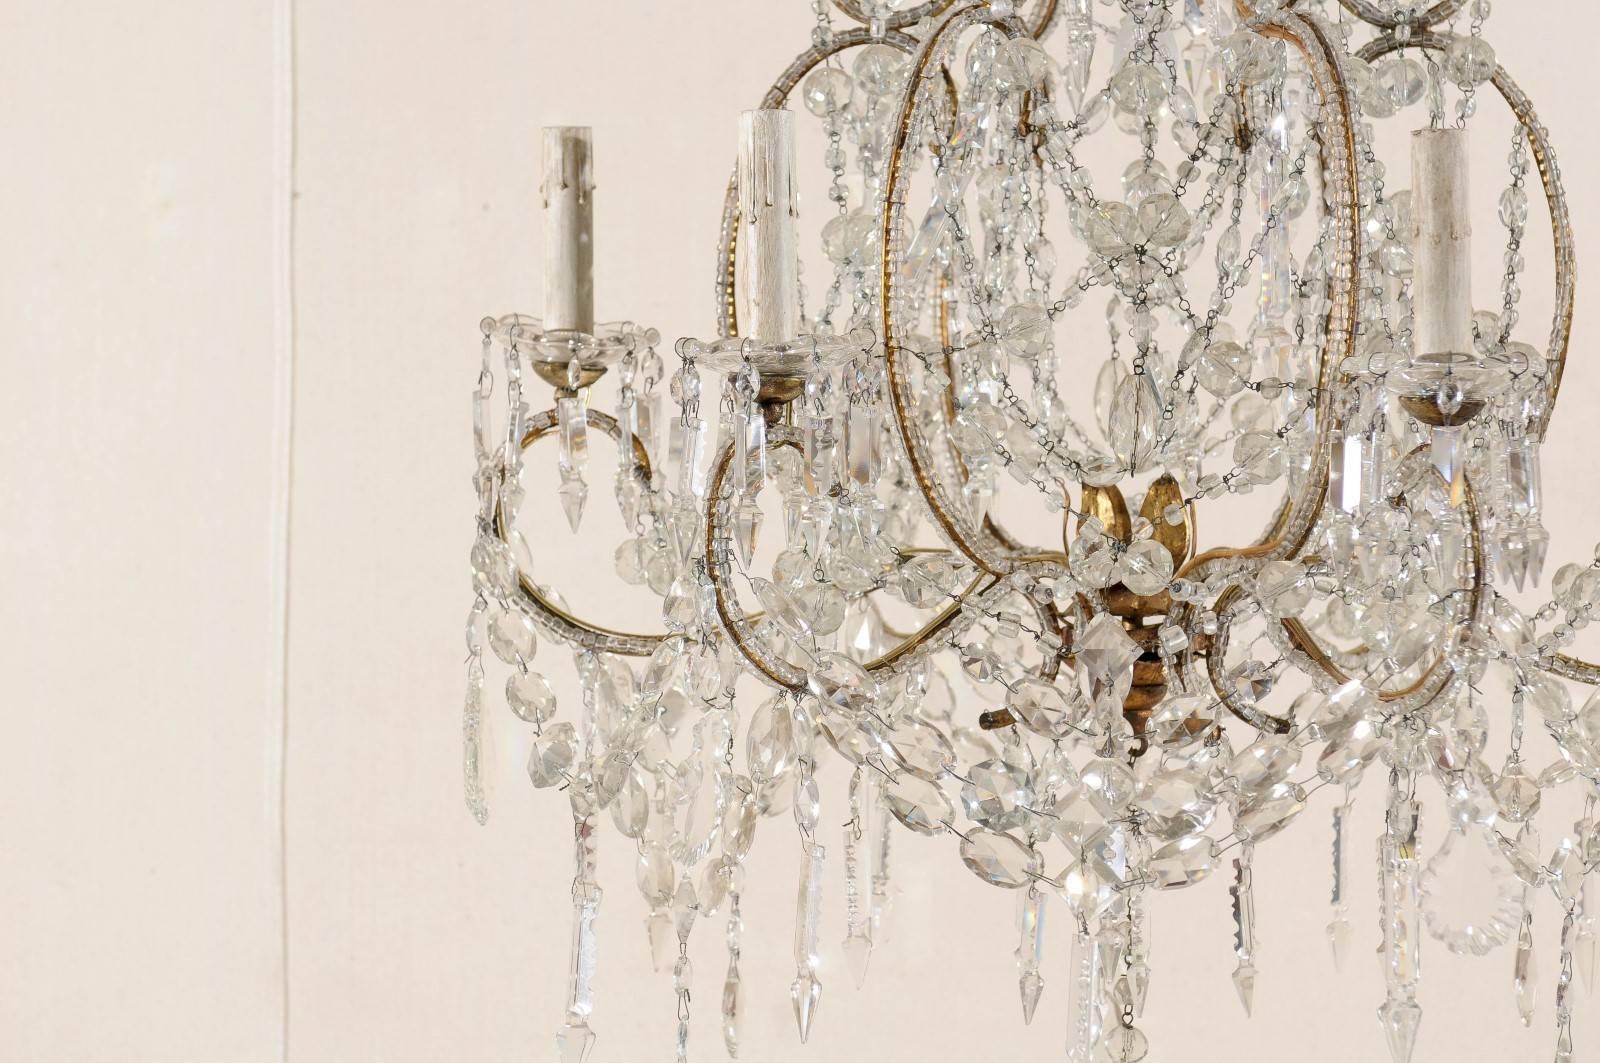 20th Century French Crystal and Gilded Iron Chandelier with Scroll Arms and Ornate Beading